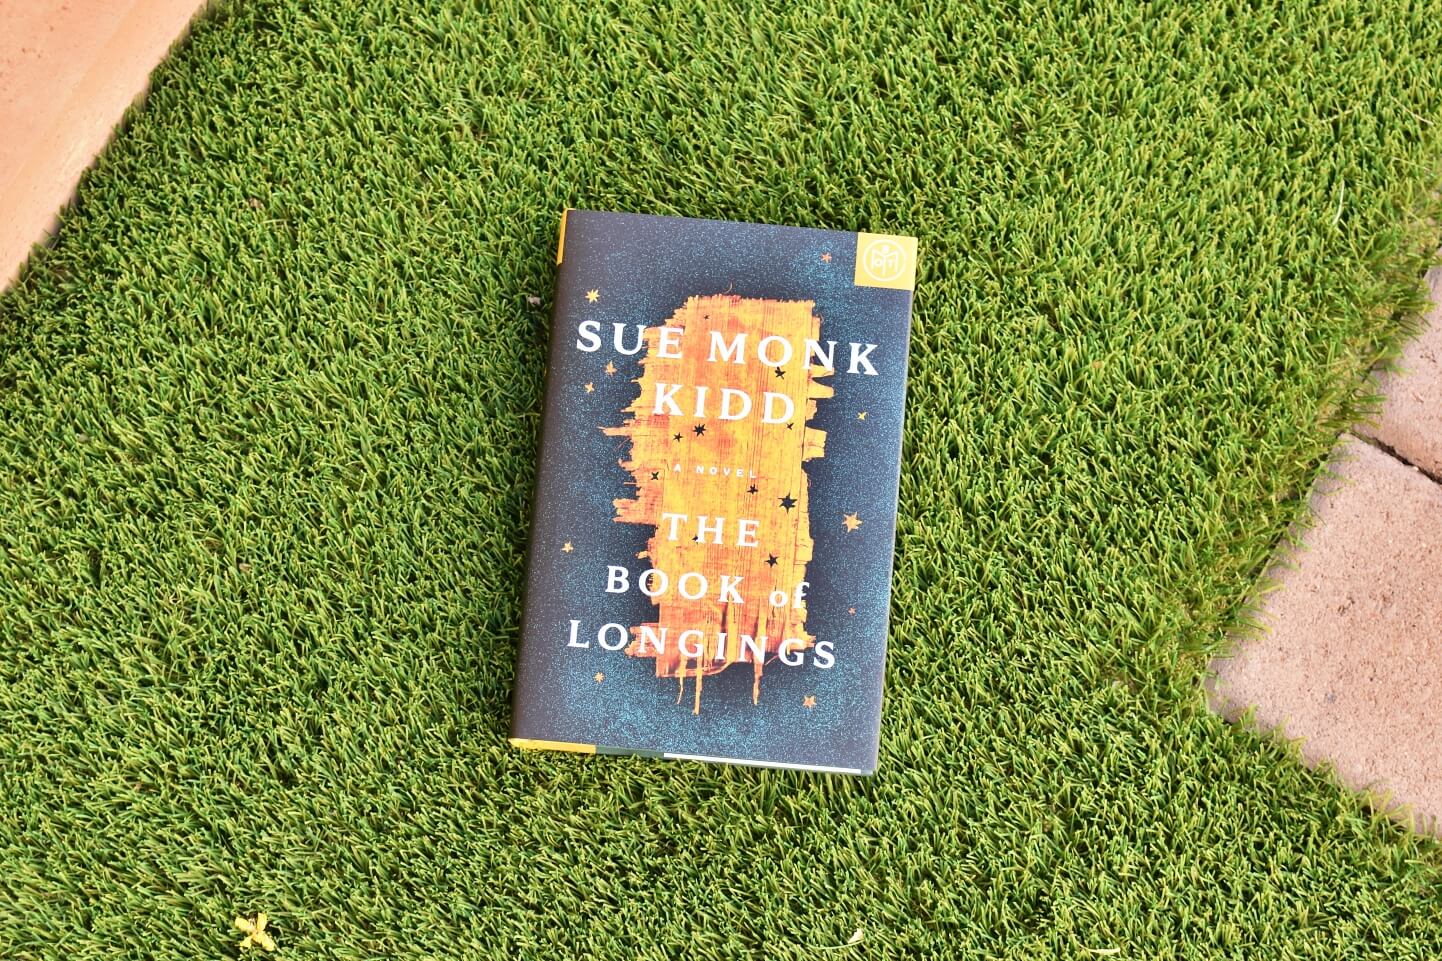 Book Club Questions for The Book of Longings by Sue Monk Kidd